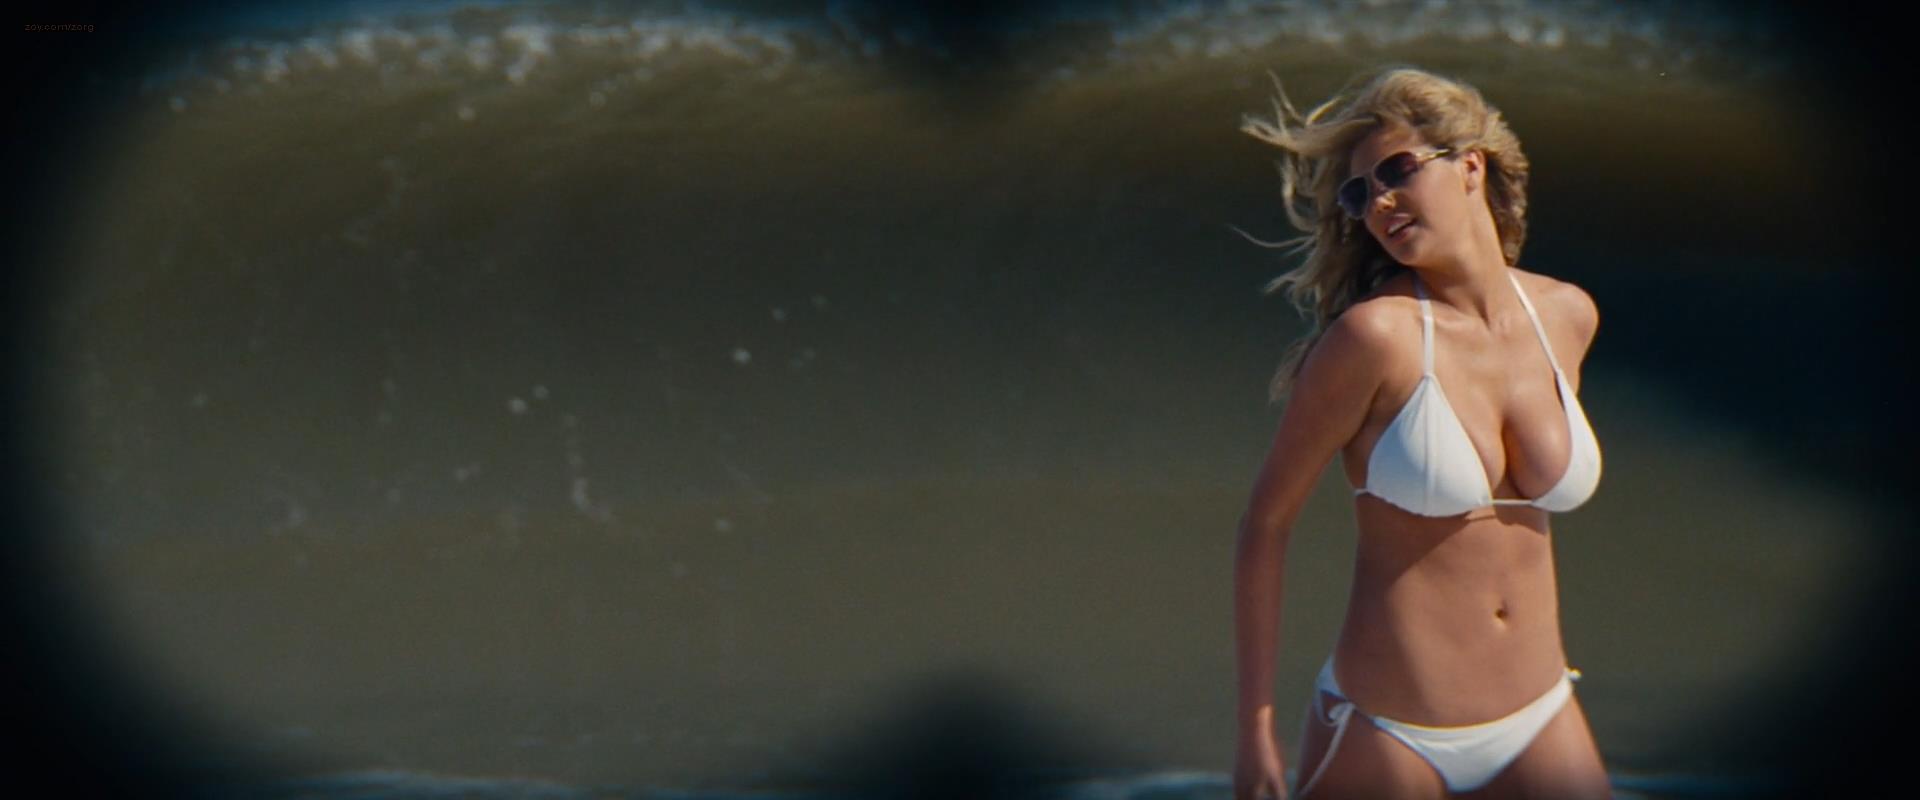 Kate Upton hot and busting out of her bikini - The Other Woman (2014) hd1080p (8)